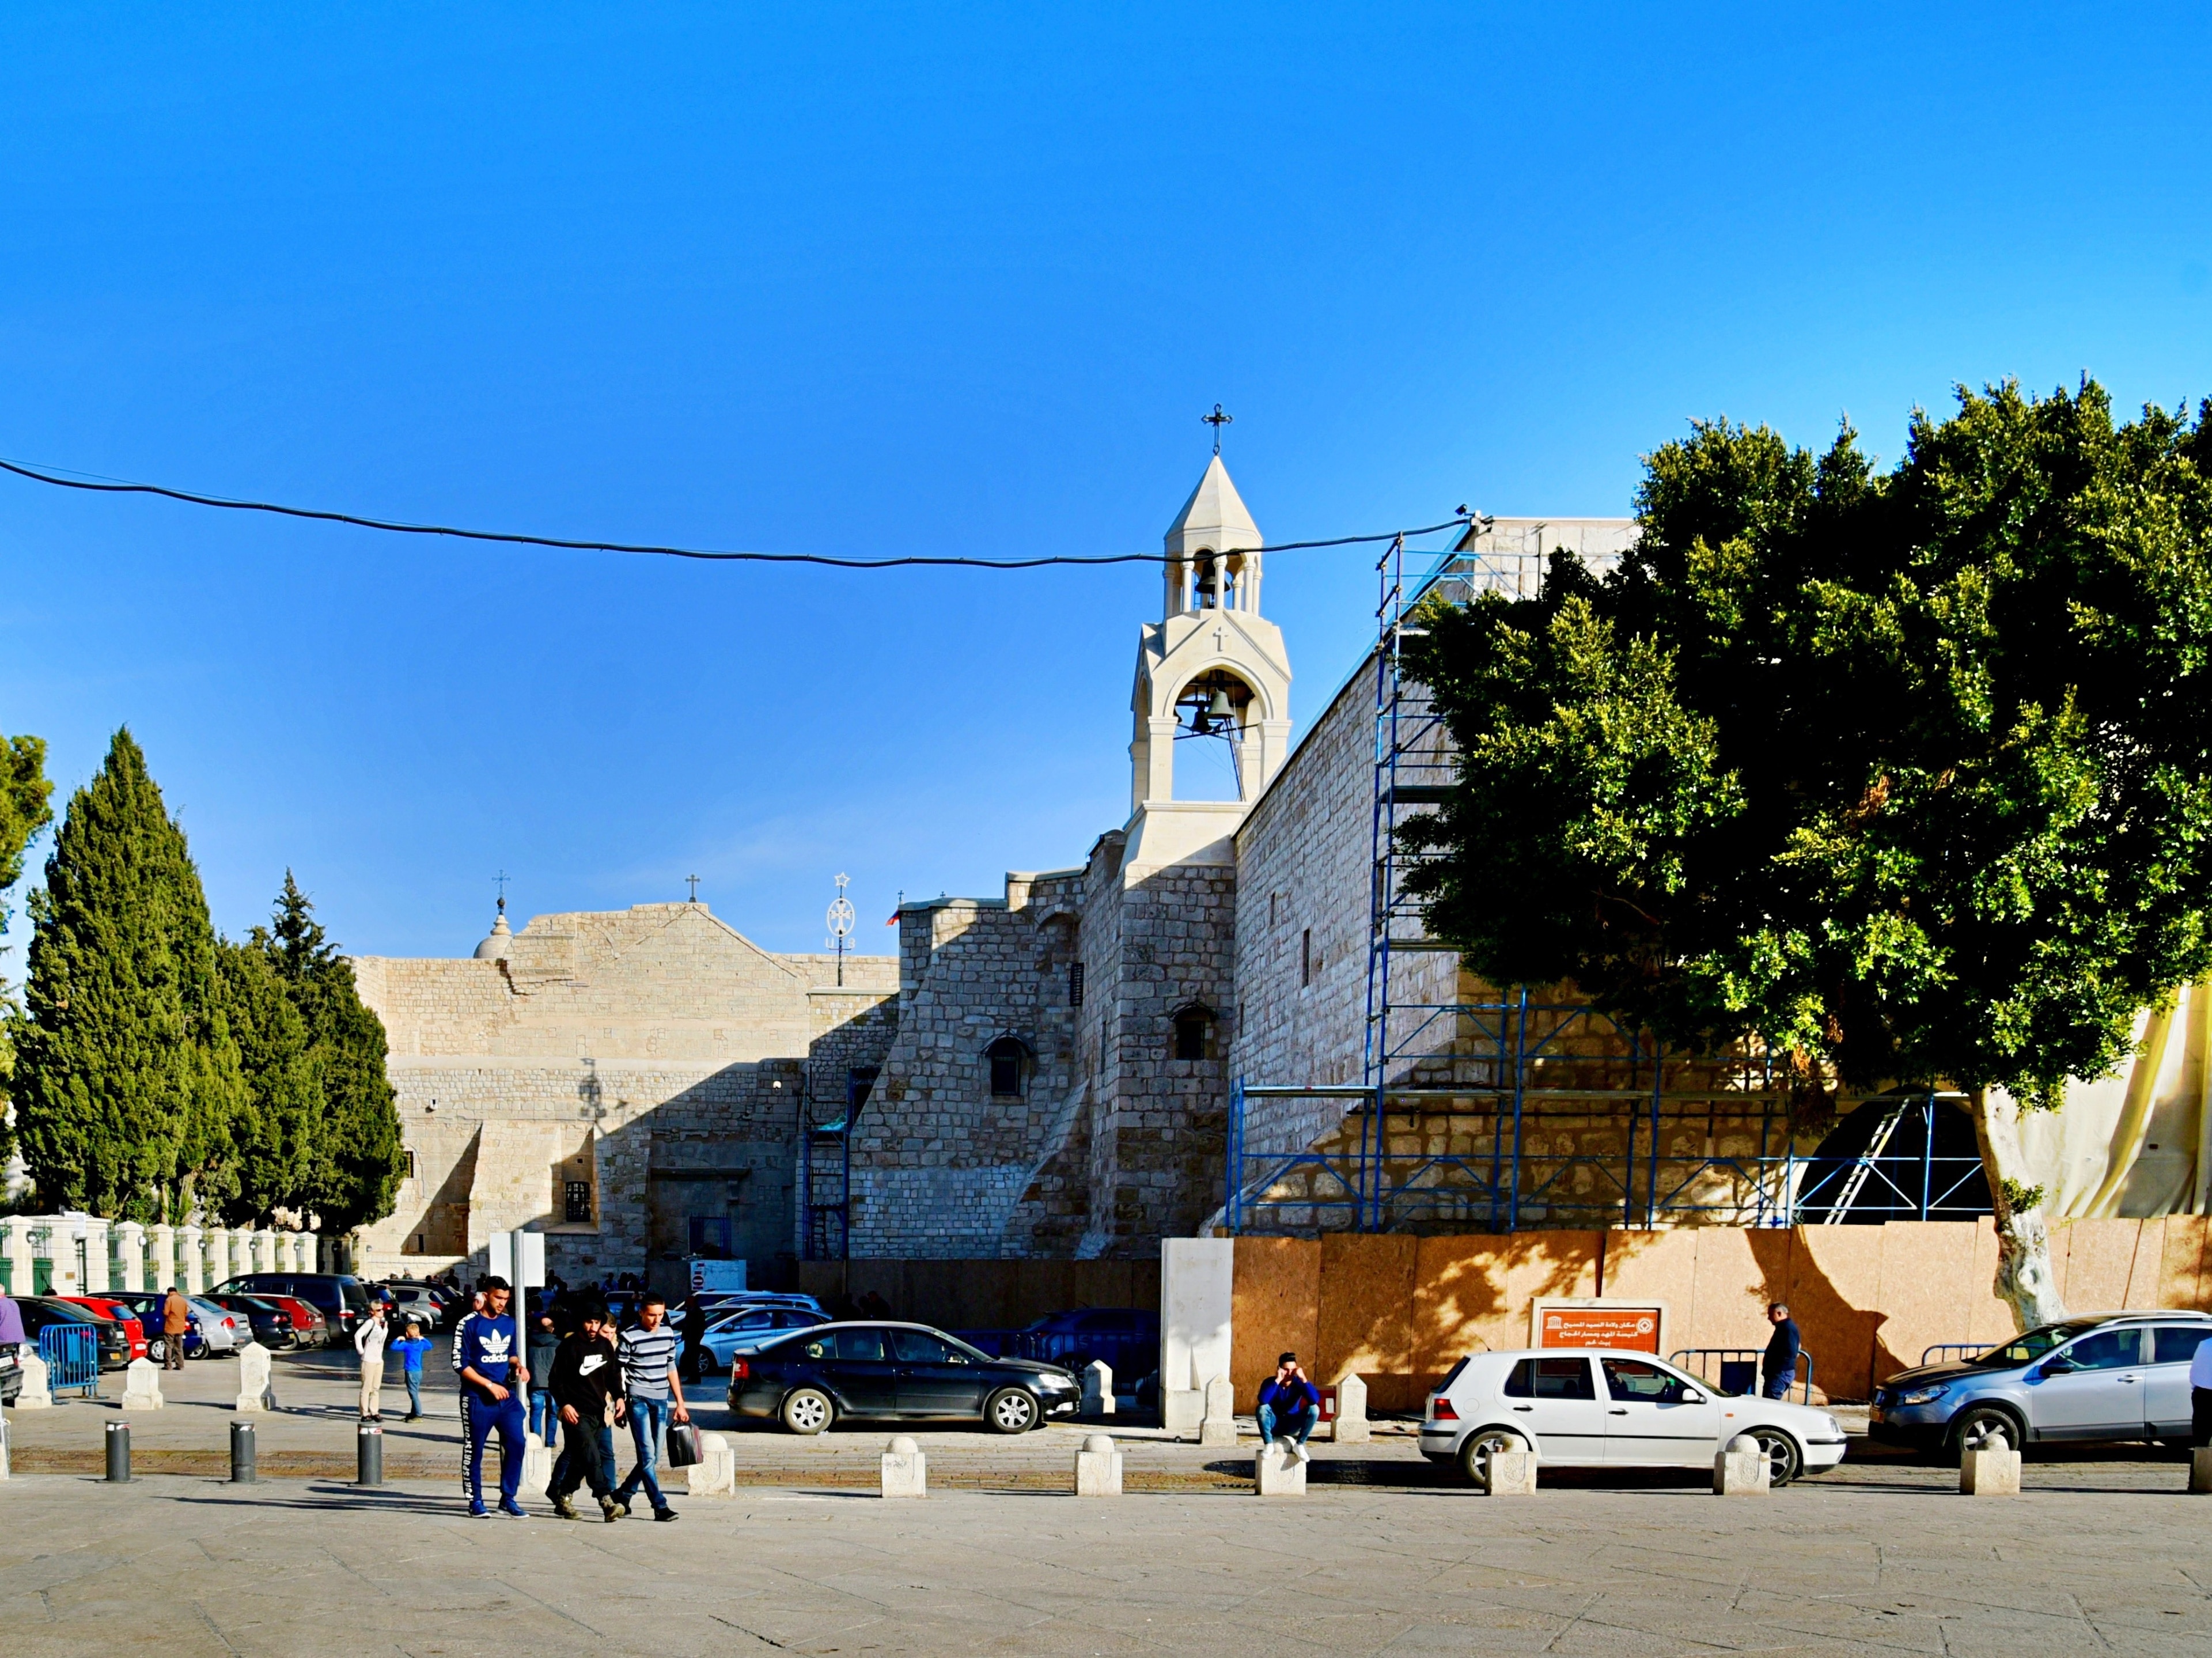 The birthplace of Jesus Christ - Church of the Nativity (كَنِيسَةُ ٱلْمَهْد‎), Bethlehem, Palestine, consider one of the most sacred place in Christianity.
#Bethlehem #Palestine #Church #Christianity #UNESCOWorldHeritageSite